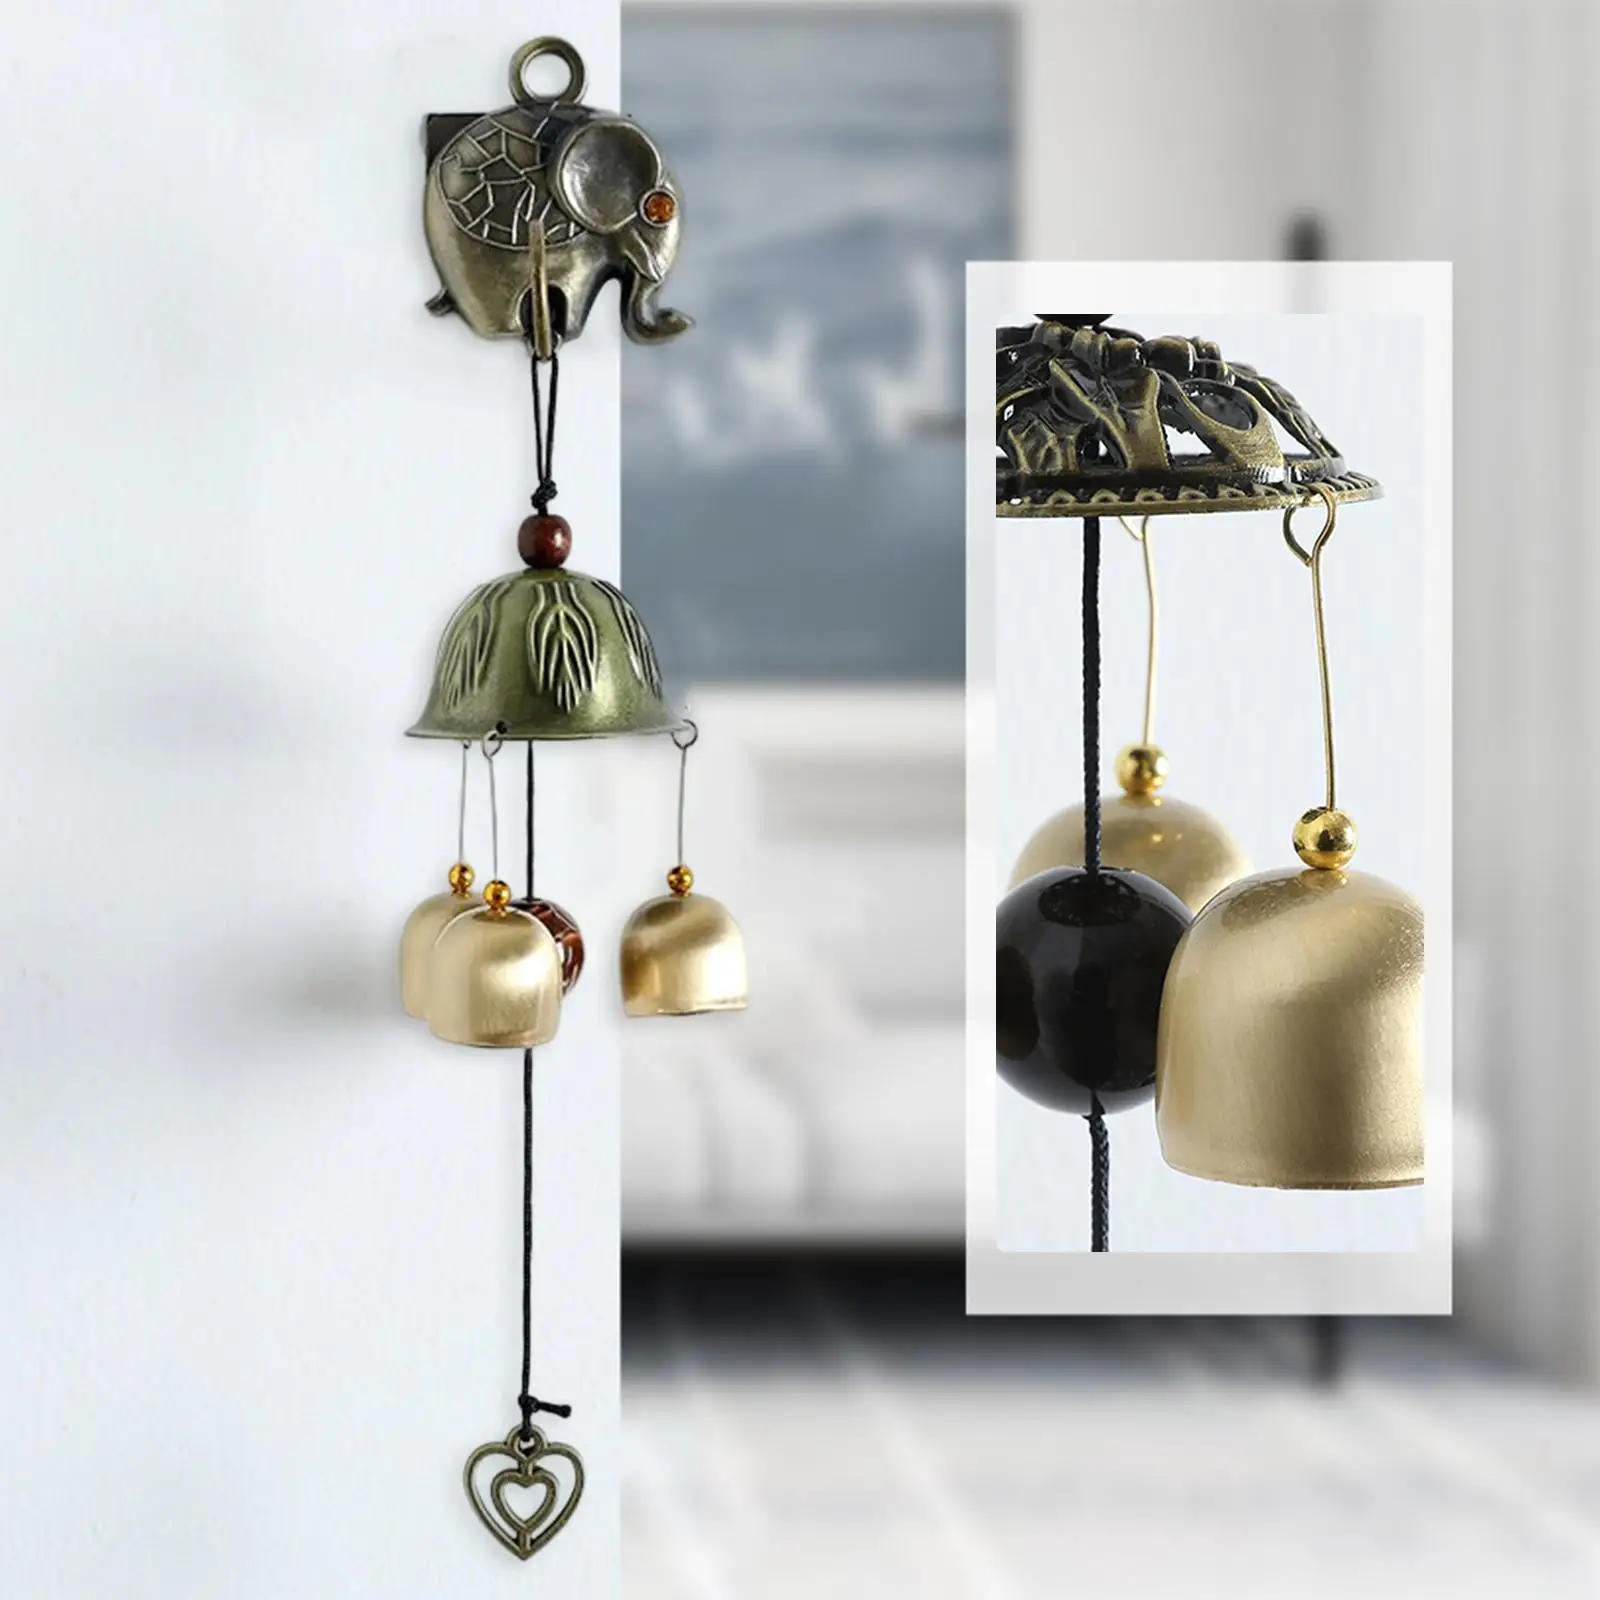 Wind Chimes Wall Hanging Manual Doorbell Metal Bell Windchime for Front Entrance Store Reminder Home Indoor Outdoor Ornament